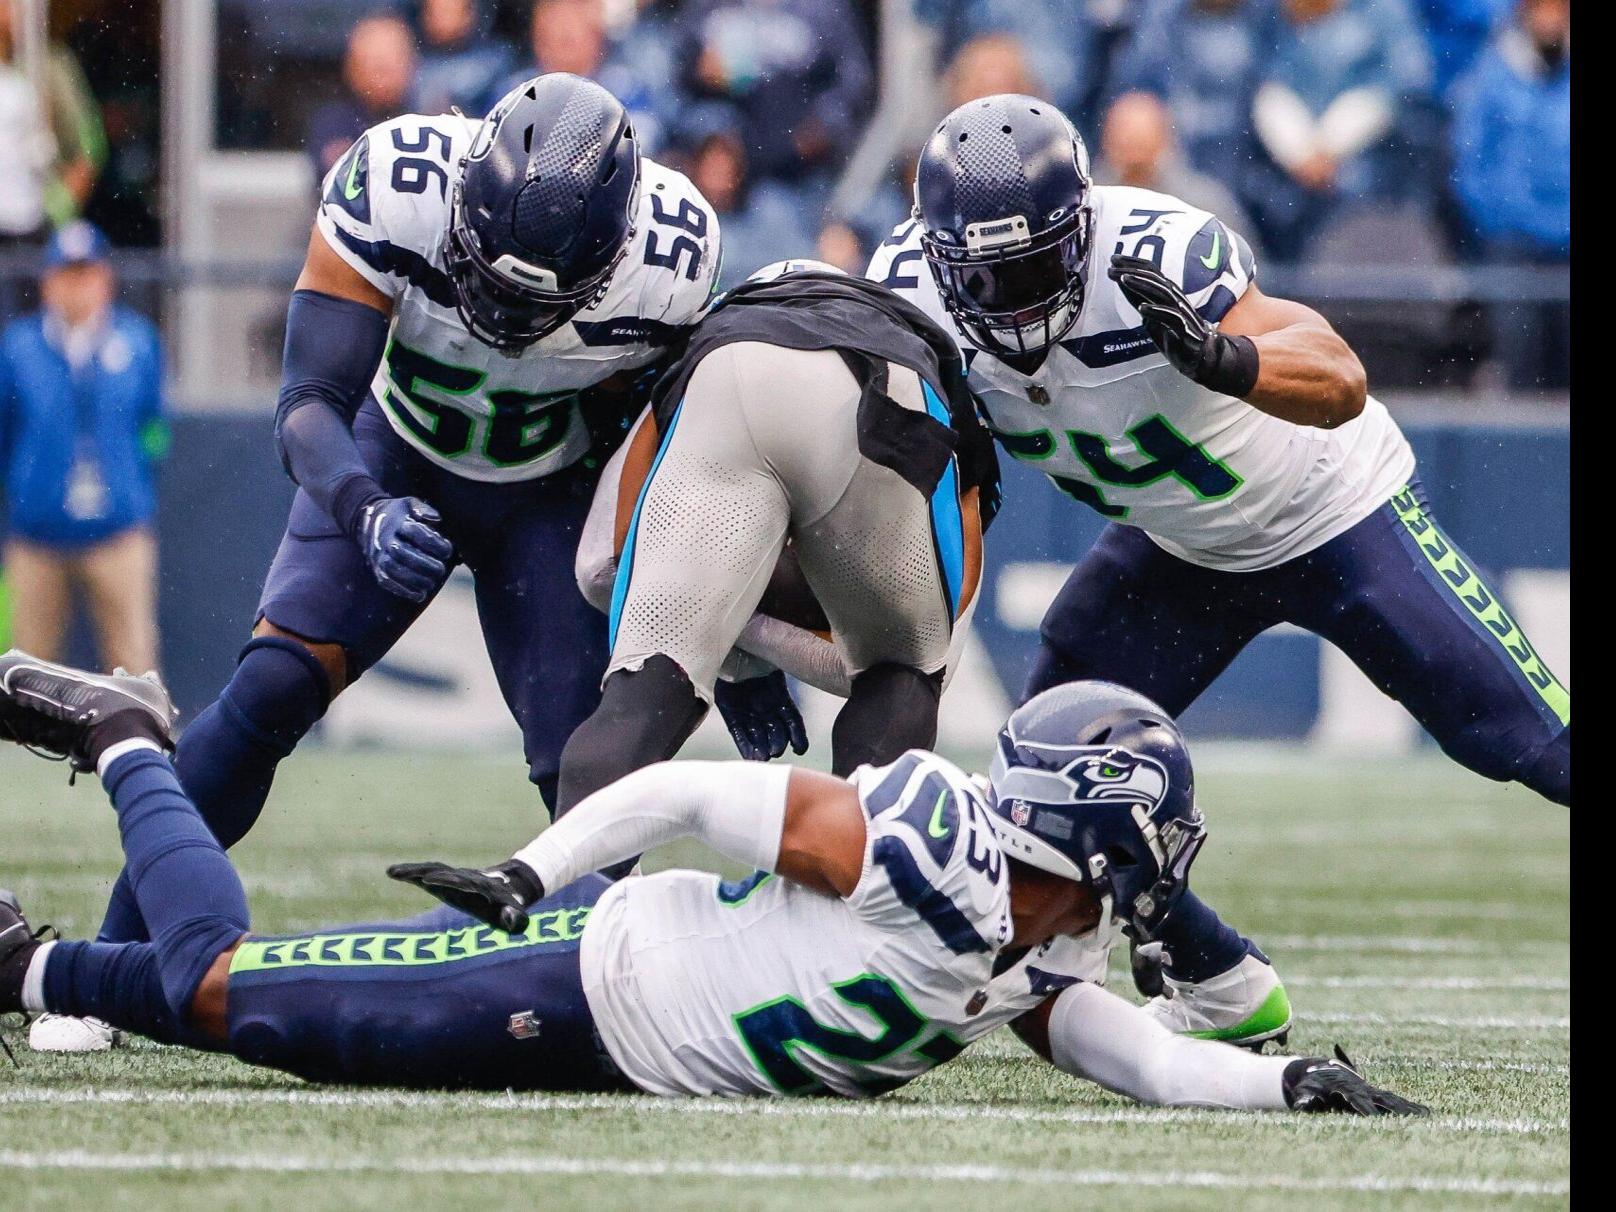 Four Downs with Bob Condotta: Answering questions after Seahawks' Week 3  win, Seahawks